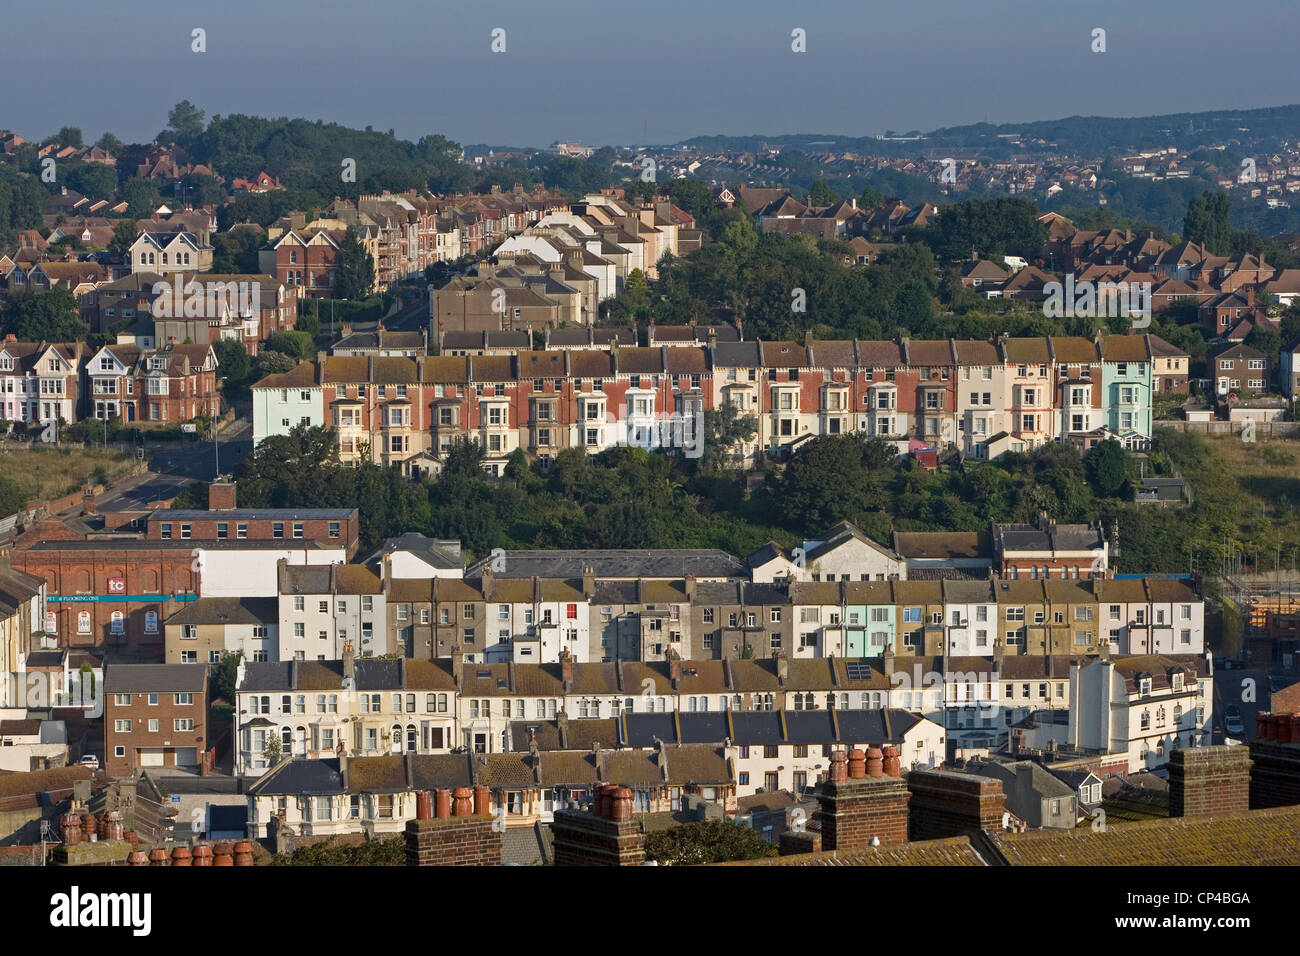 United Kingdom - England - East Sussex - Hastings. Panorama City Stock Photo